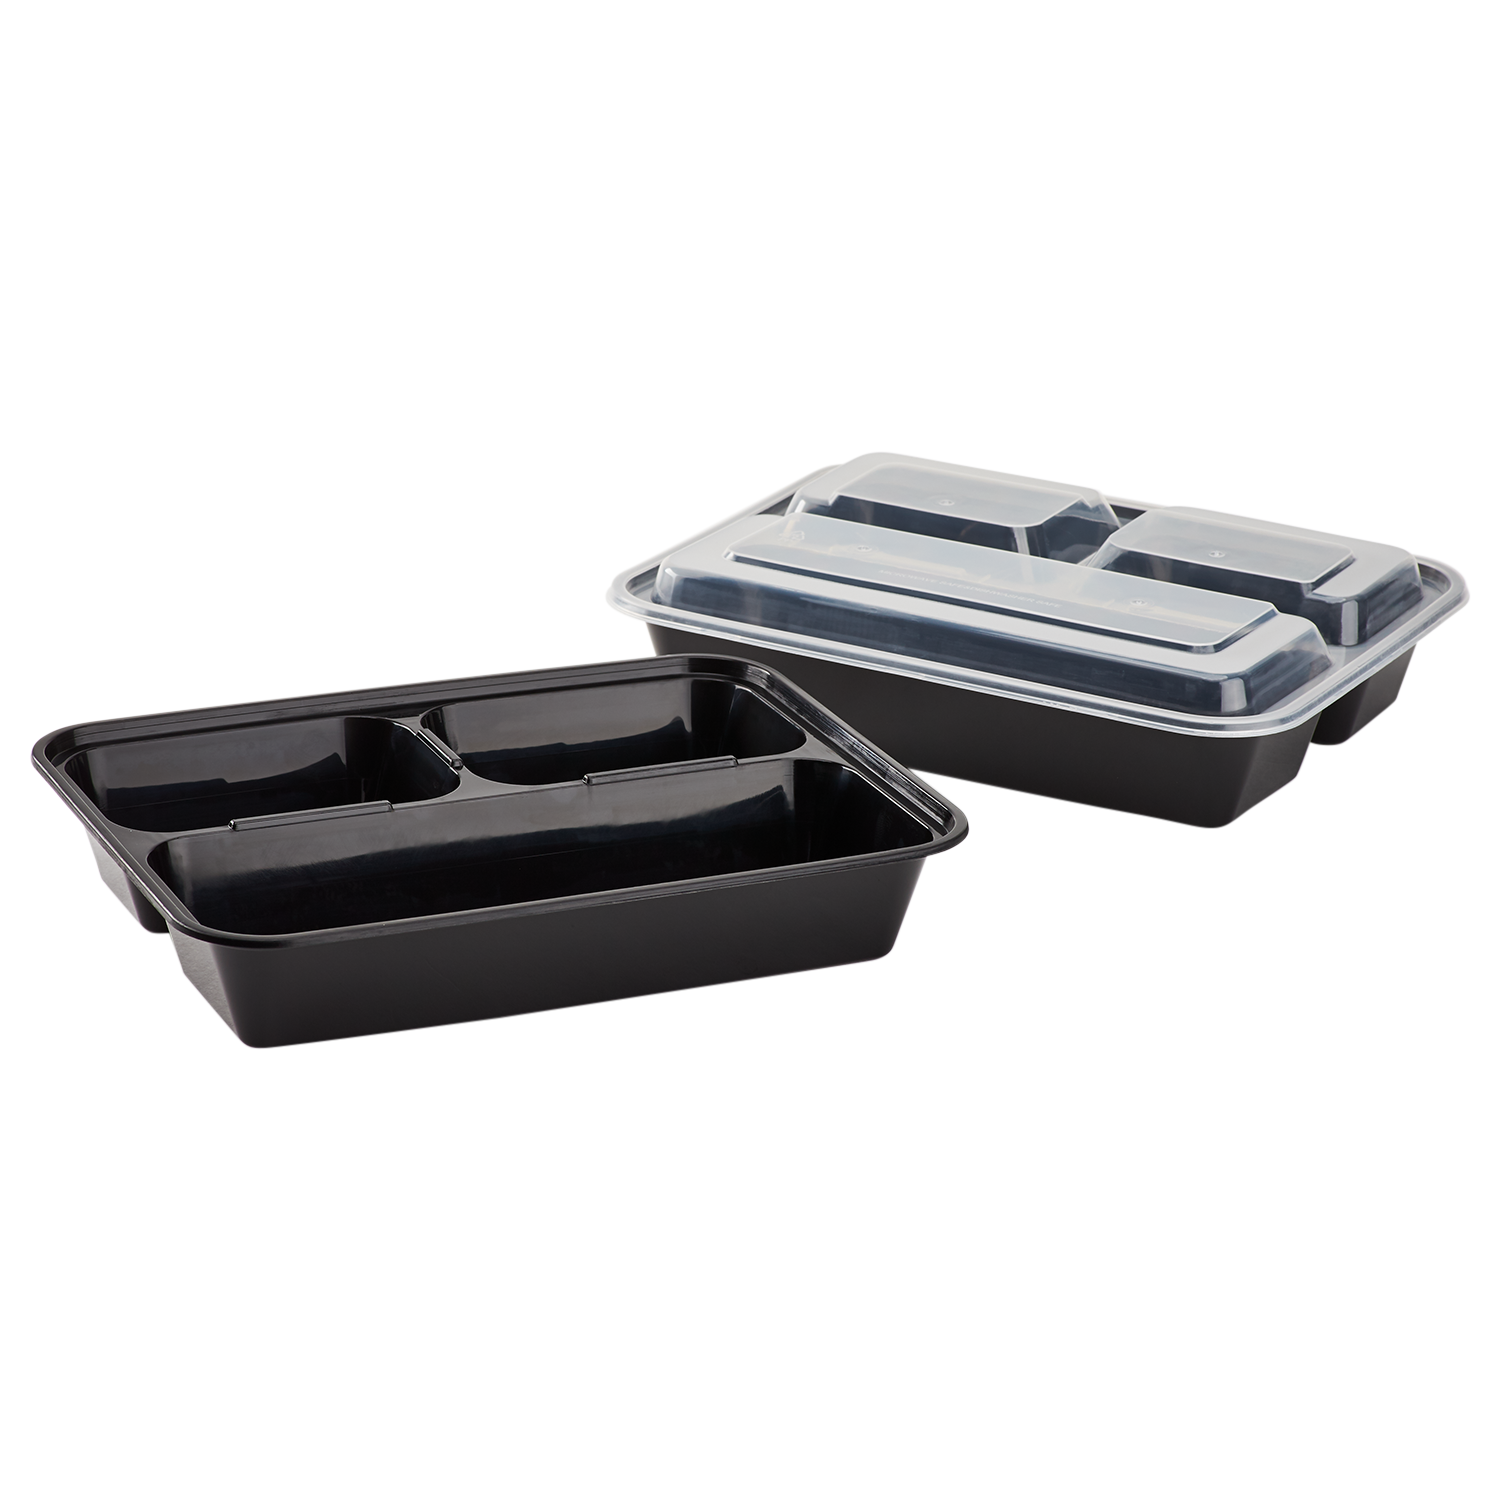  OTOR Bento Boxes Meal Prep Containers 3 Compartments